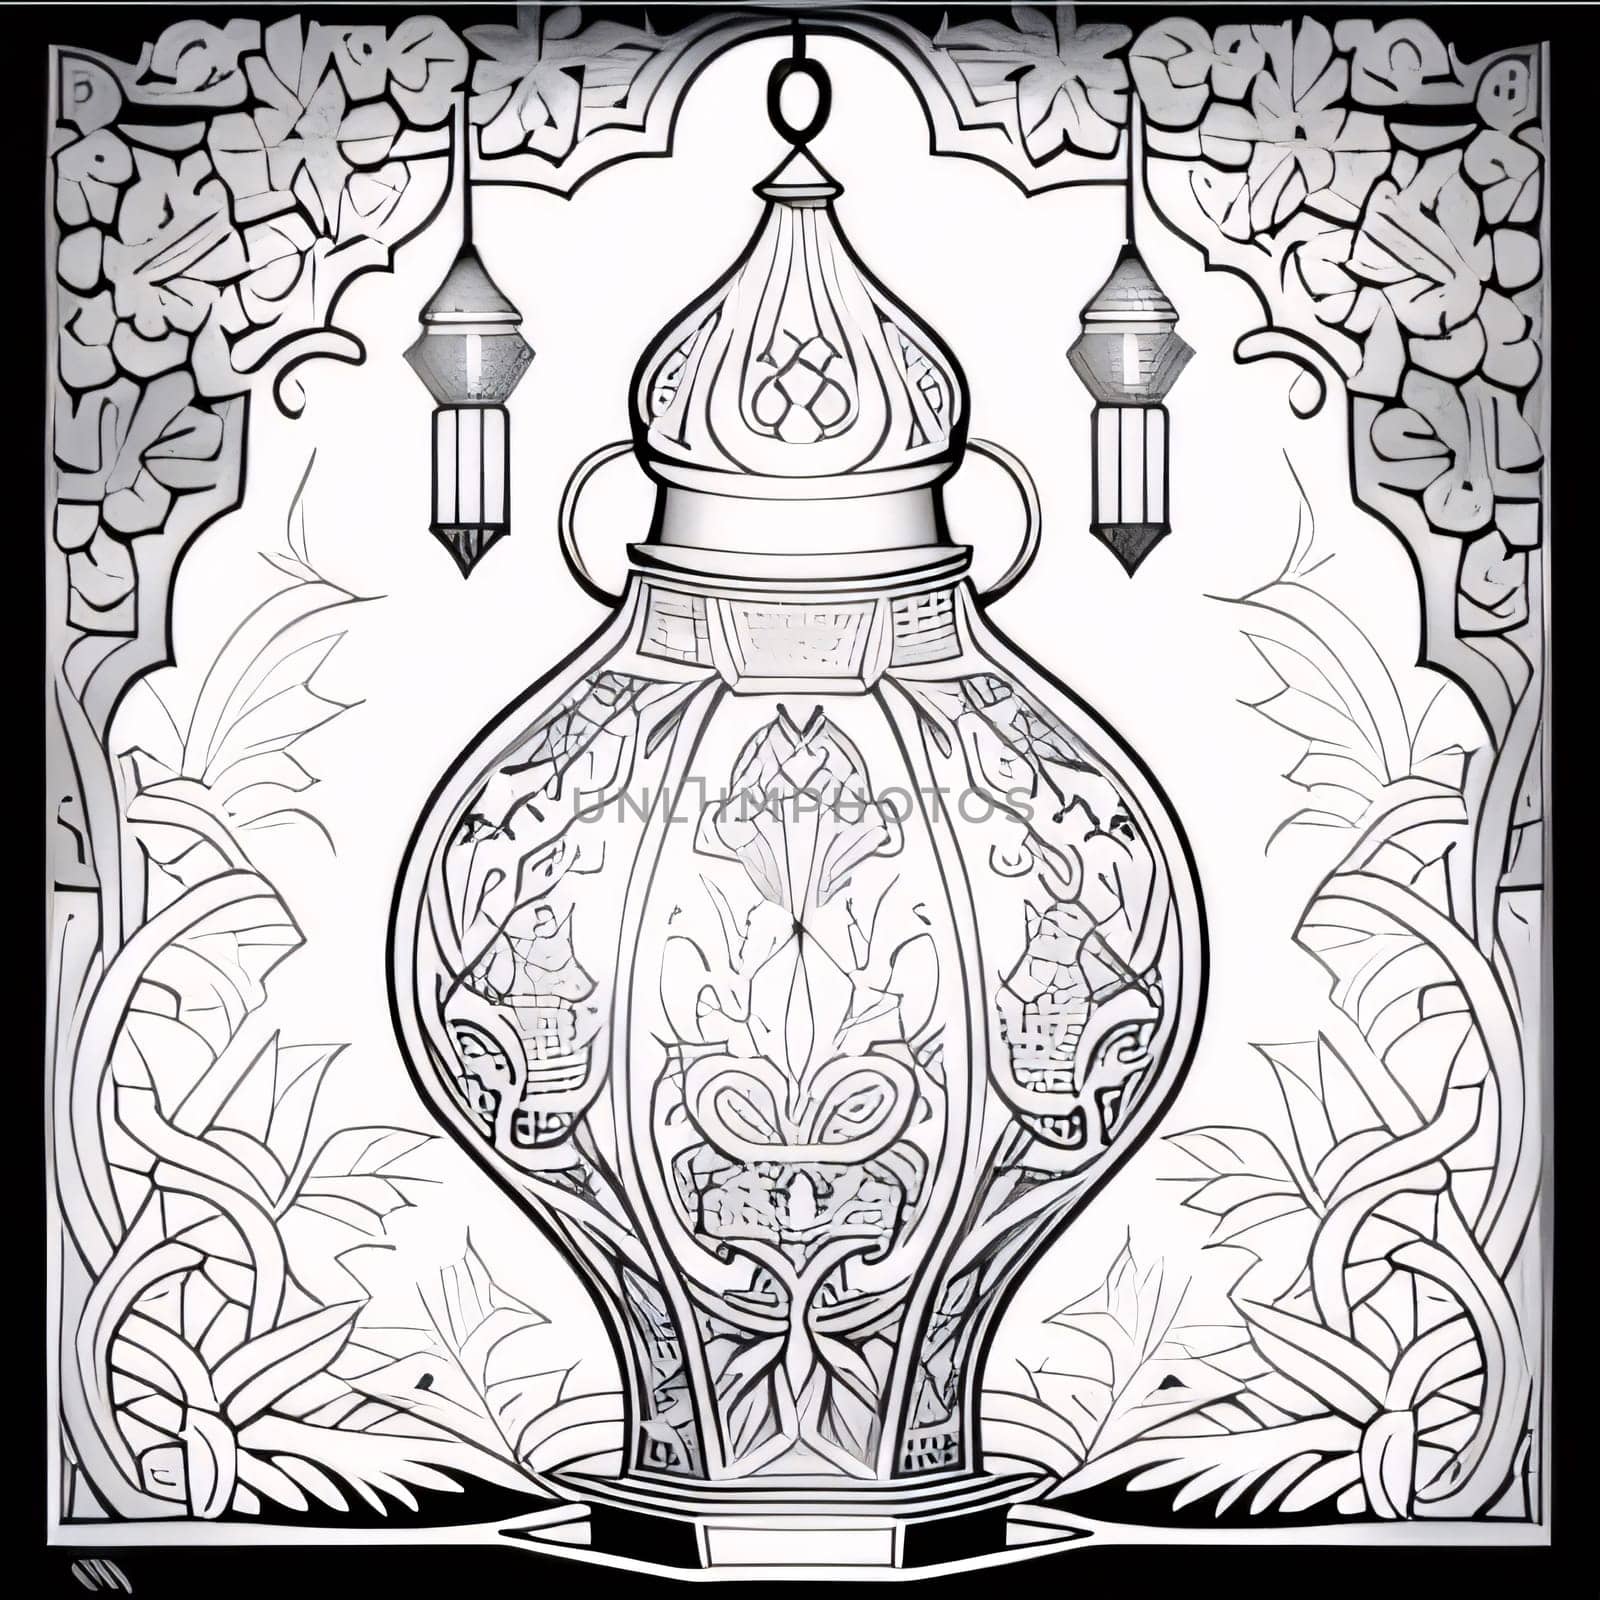 Black and white coloring sheet, richly decorated lantern. Lantern as a symbol of Ramadan for Muslims. by ThemesS